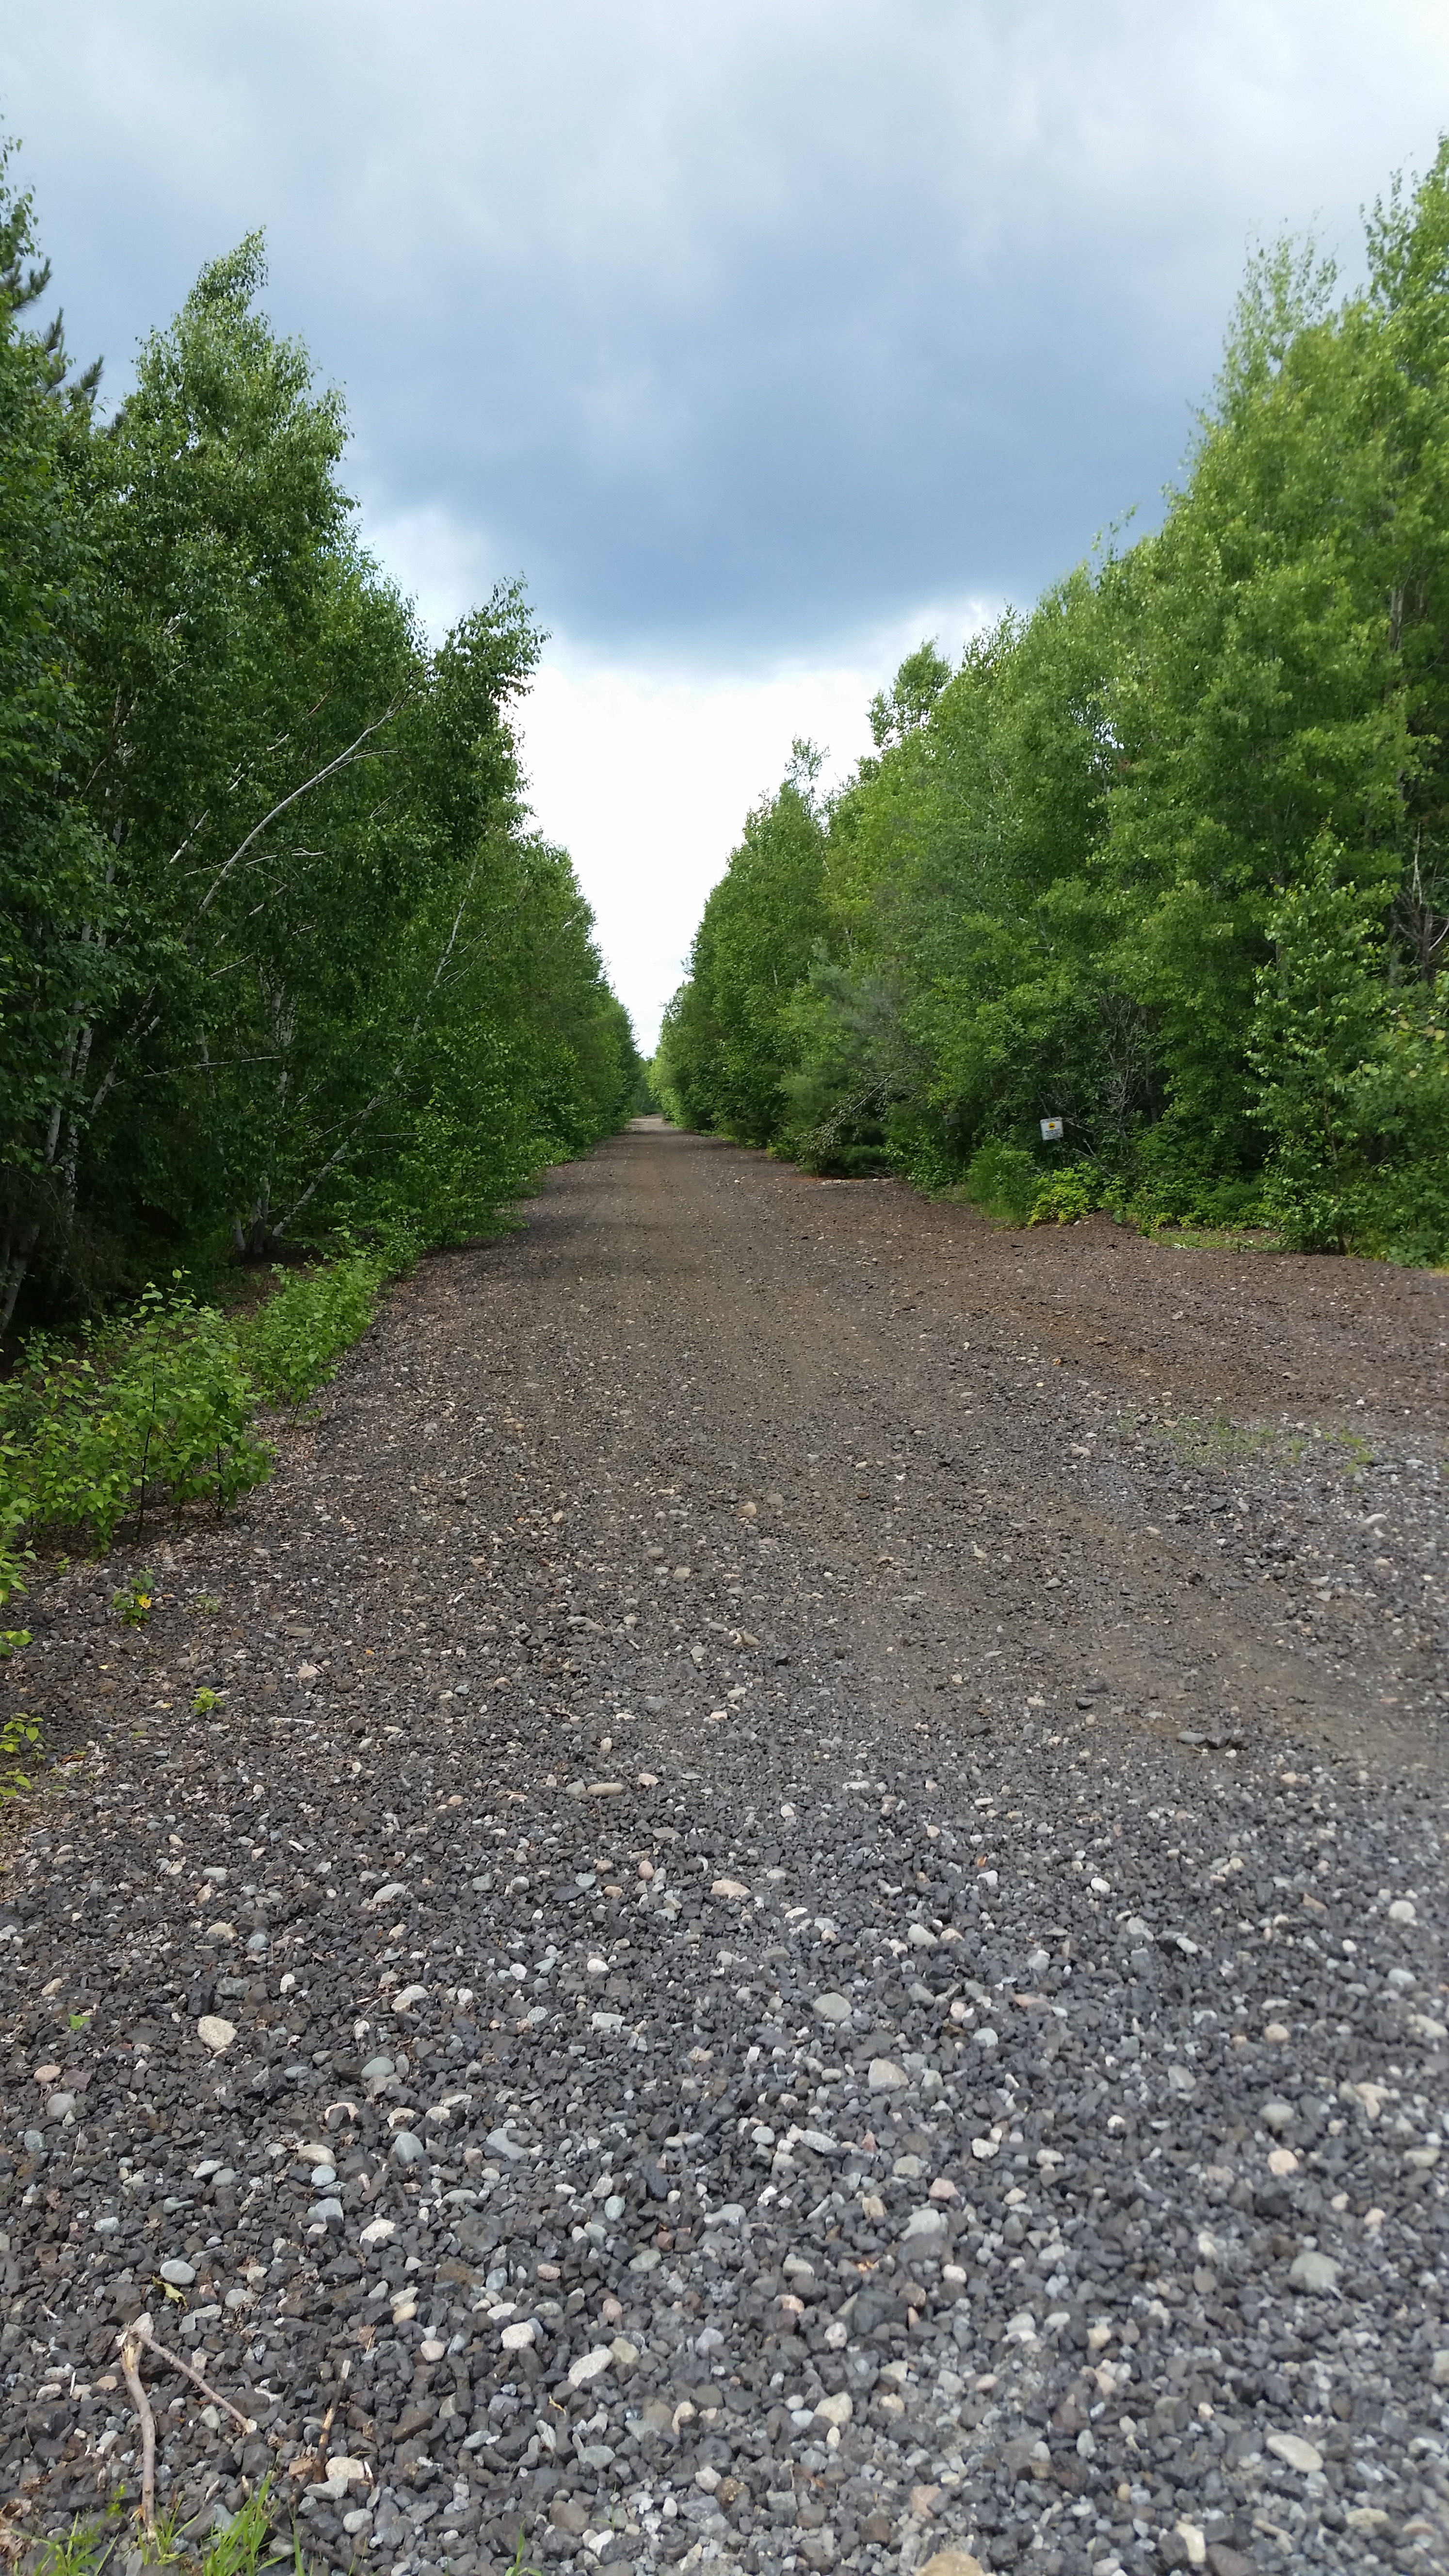 A grey gravel road from the old town of Desaulniers, stretching into the distance, lined on both sides by thick walls of green foliage under a grey cloudy sky